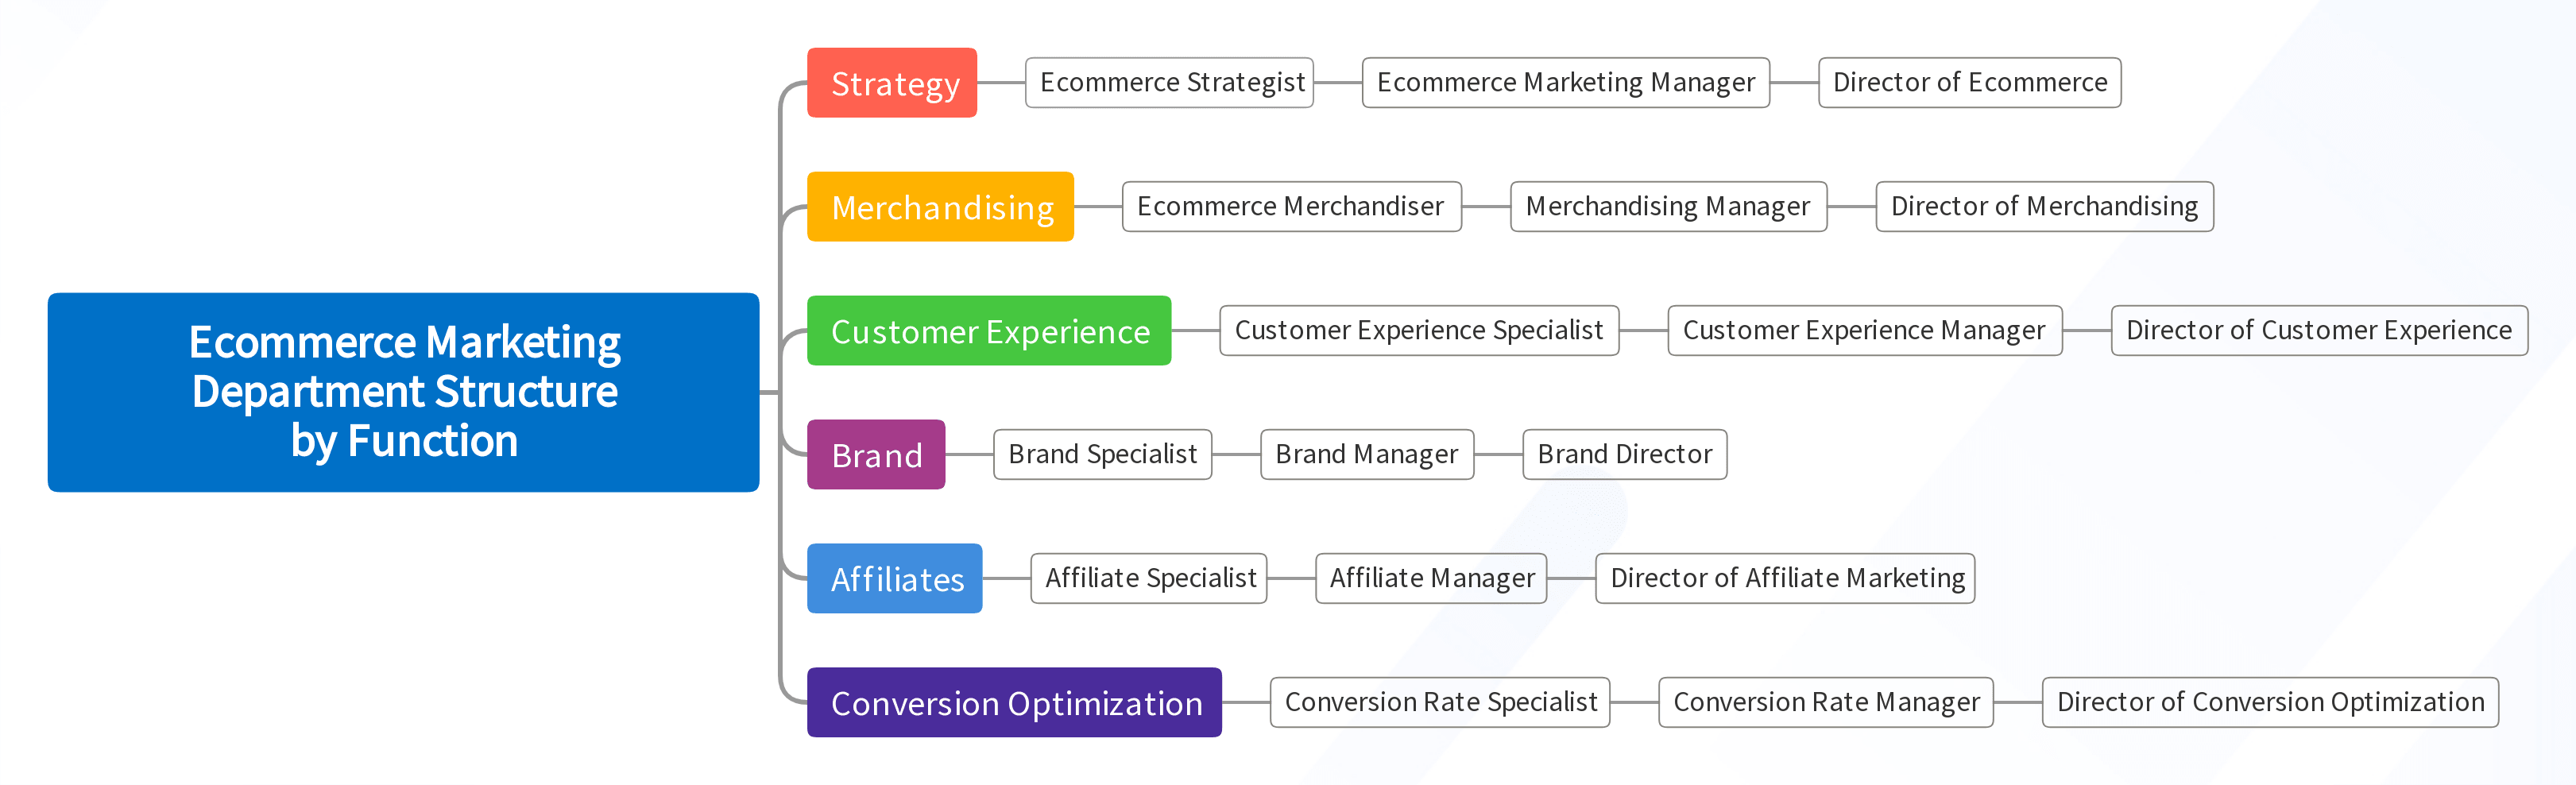 Ecommerce Marketing Department Structure by Function